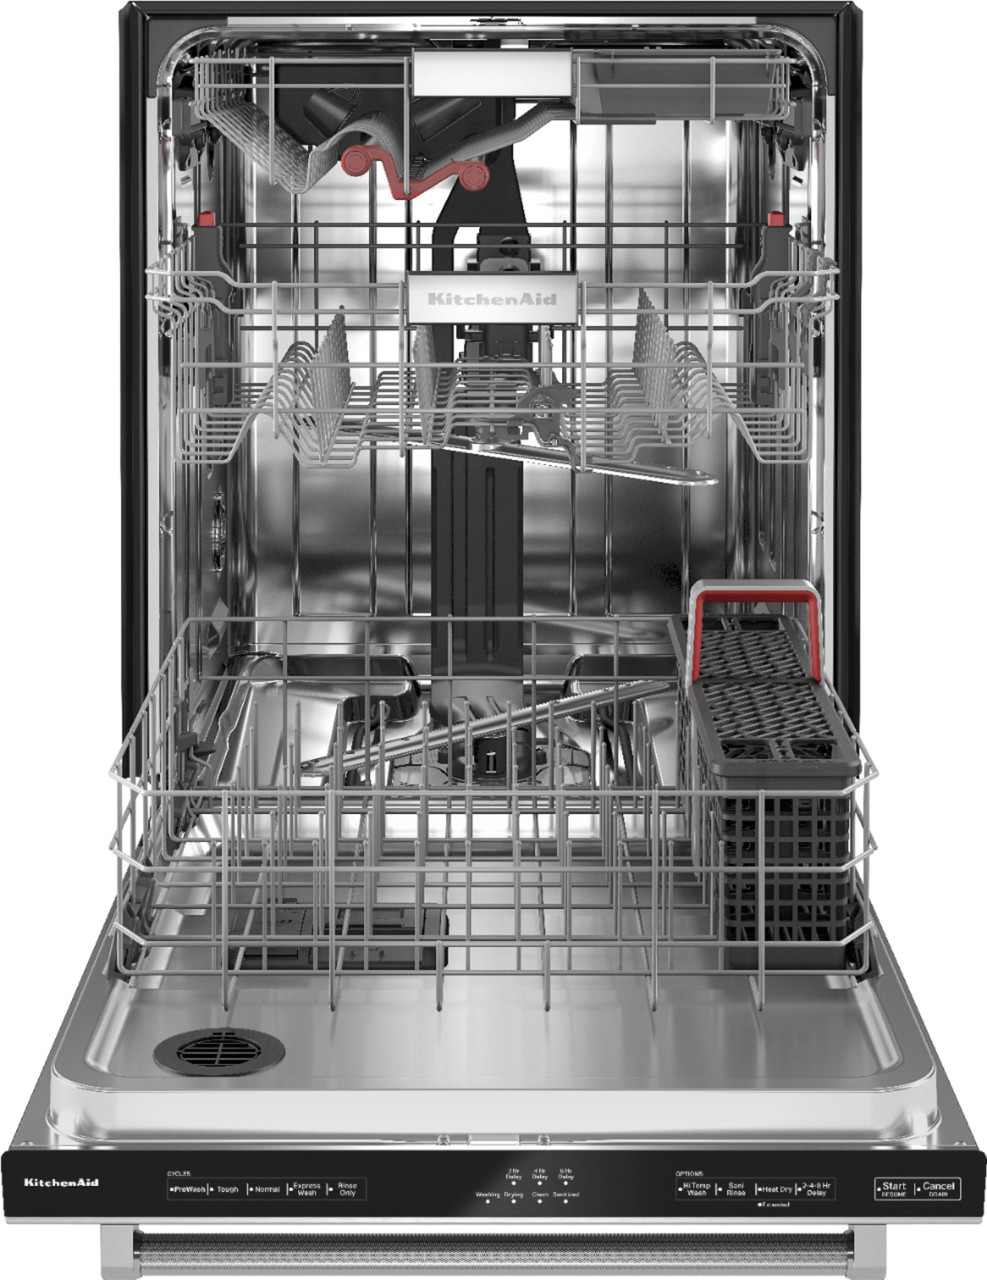 KitchenAid - Top Control Built-In Dishwasher with Stainless Steel Tub, FreeFlex™ 3rd Rack, 44dBA - Stainless Steel With PrintShield Finish